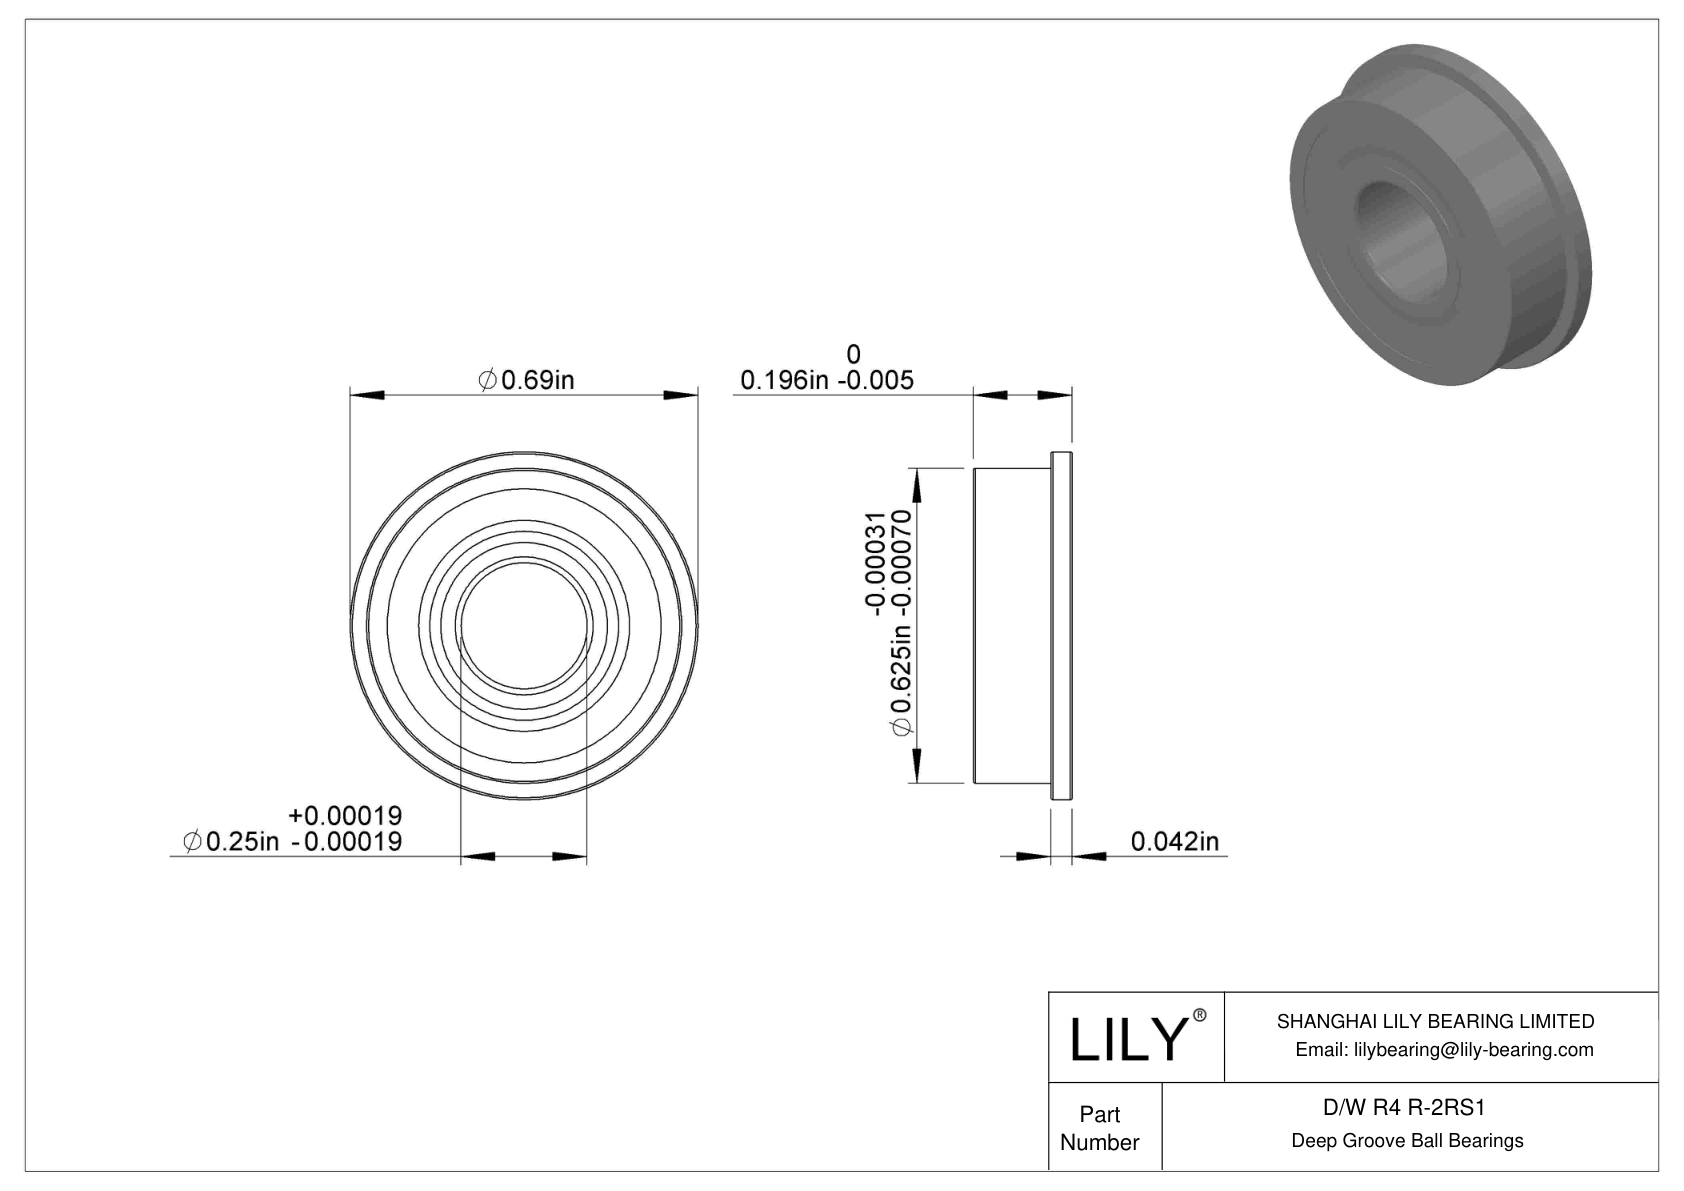 D/W R4 R-2RS1 Flanged Ball Bearings cad drawing